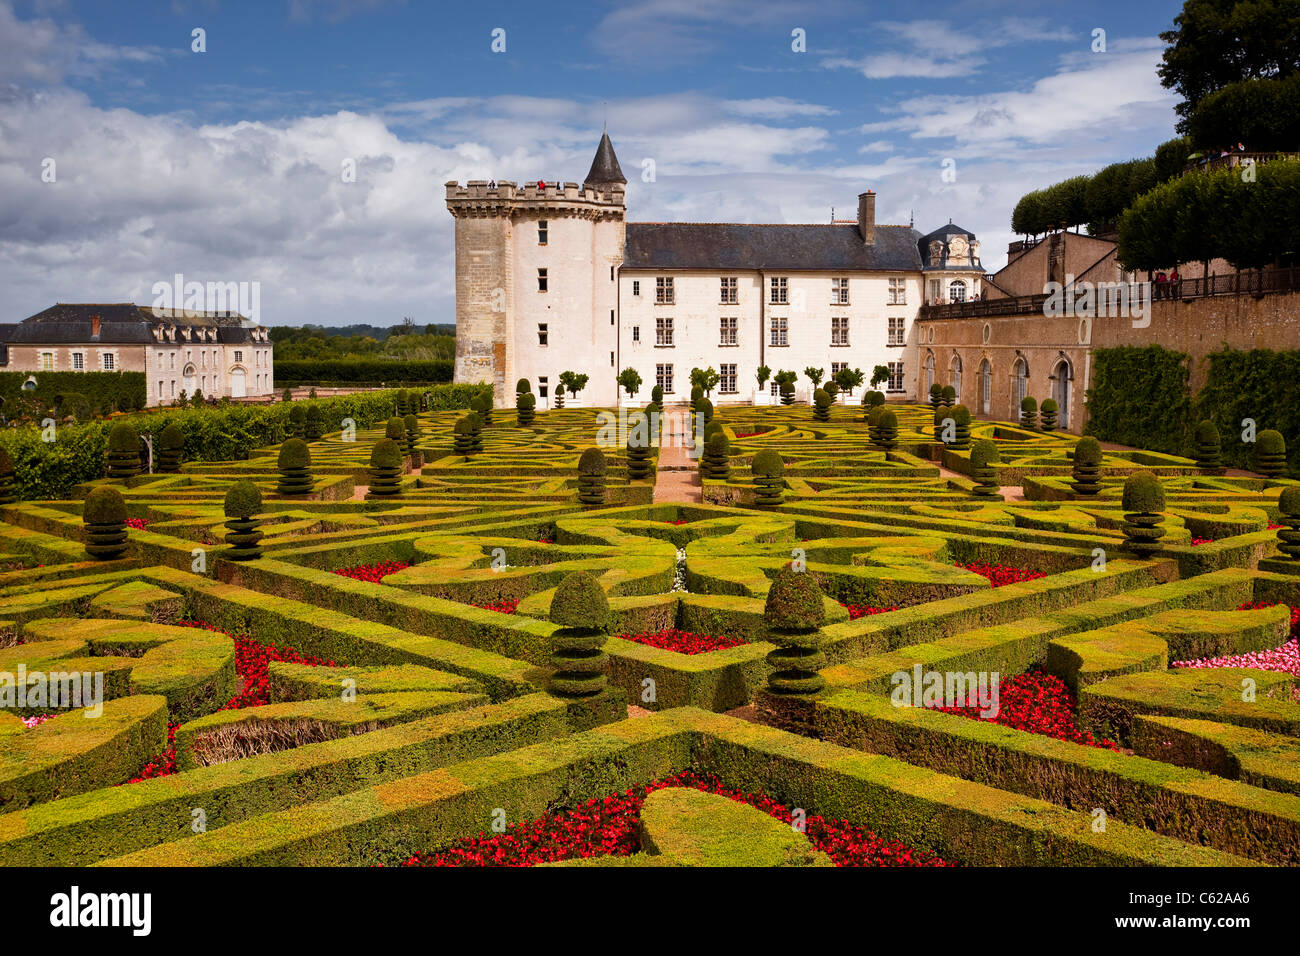 The beautiful garden of love at chateau Villandry in the historic Loire Valley, France. Stock Photo